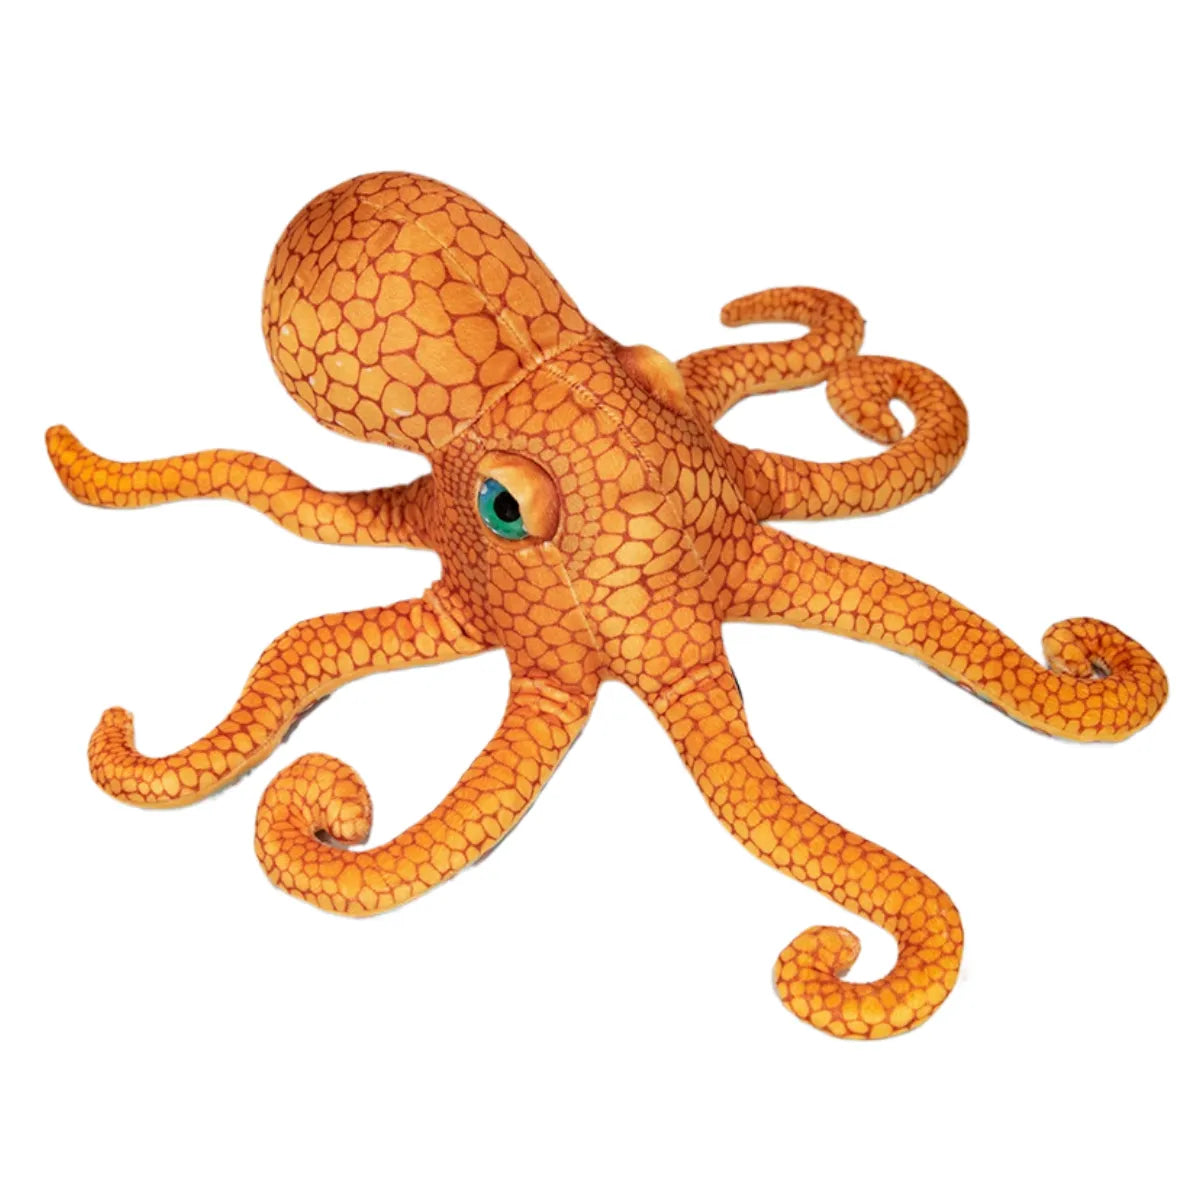 Realistic Octopus Stuffed Animal Marine Animals Toy Gifts for Kids (21.6 inch)